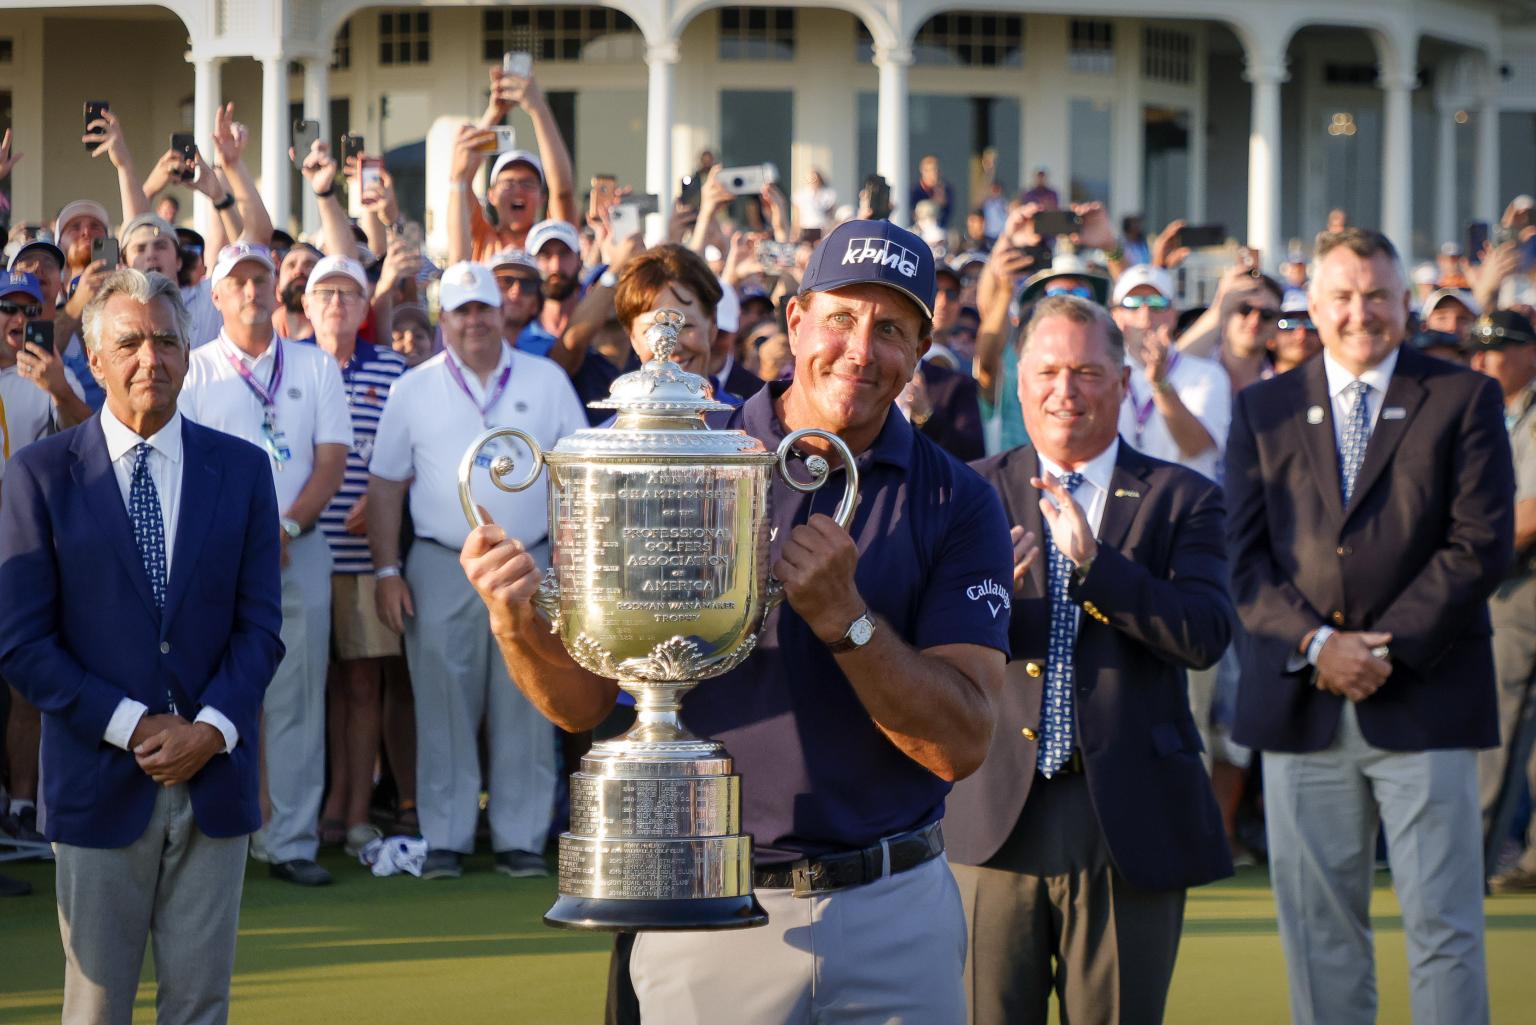 Phil Mickelson used TWO DRIVERS to win the US PGA Championship GolfMagic